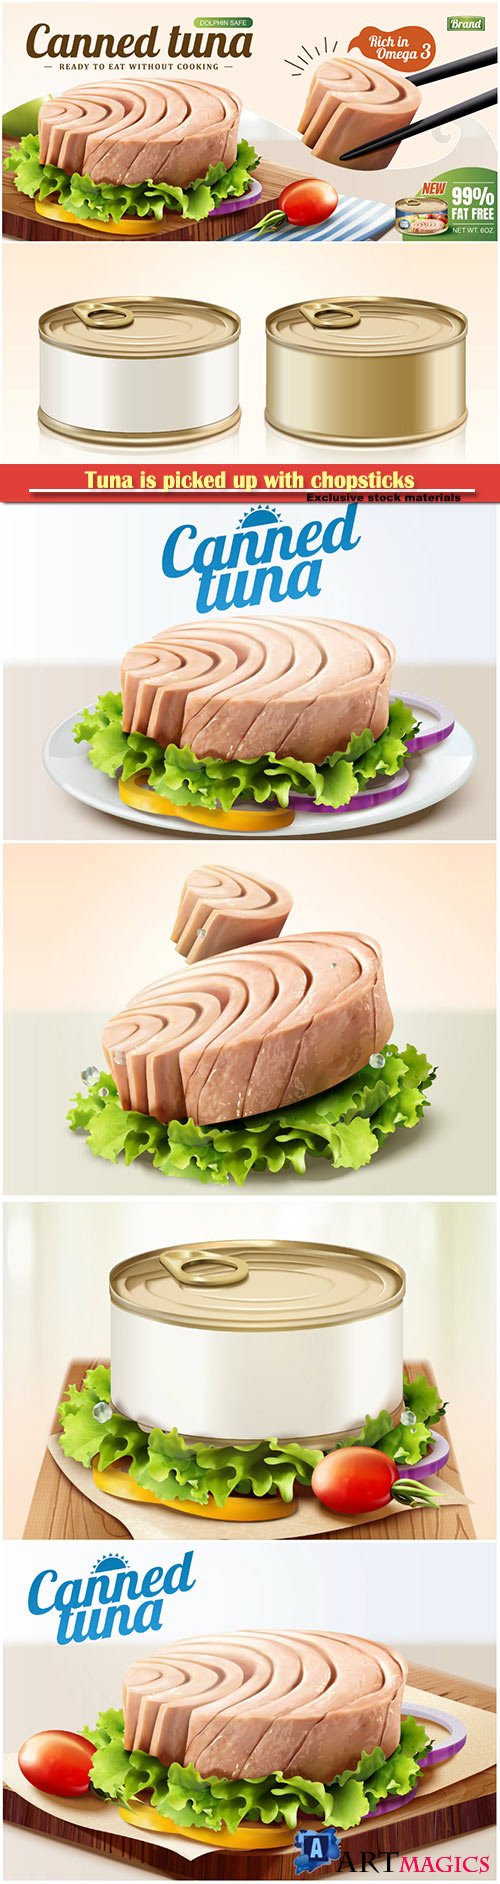 Tuna is picked up with chopsticks in 3d illustration, canned food ads